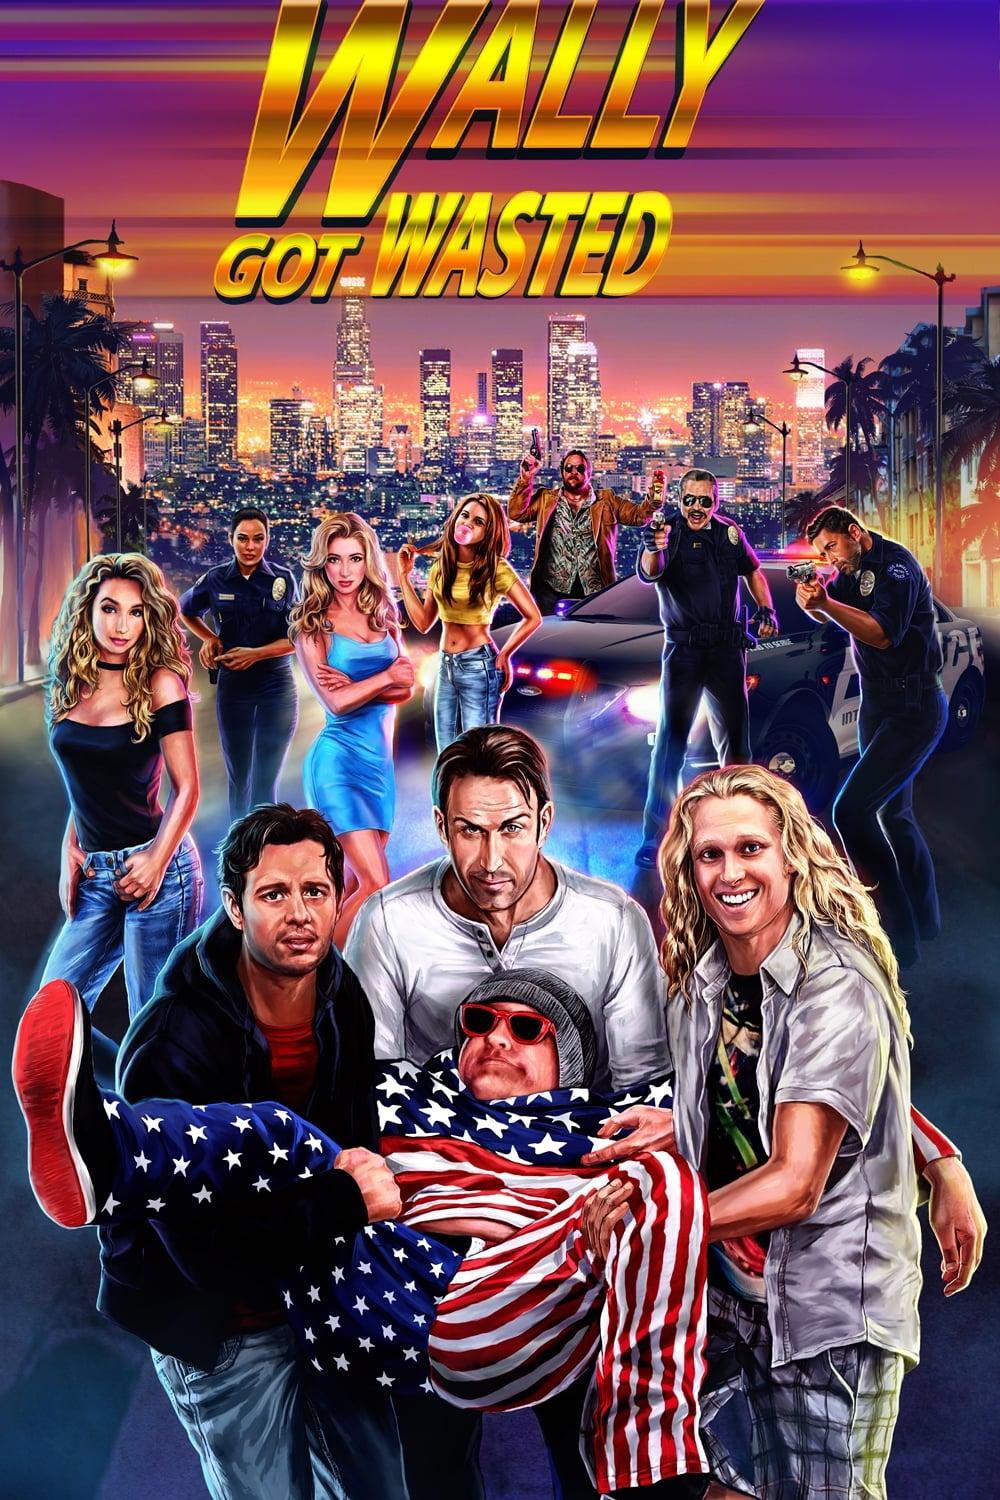 Wally Got Wasted poster